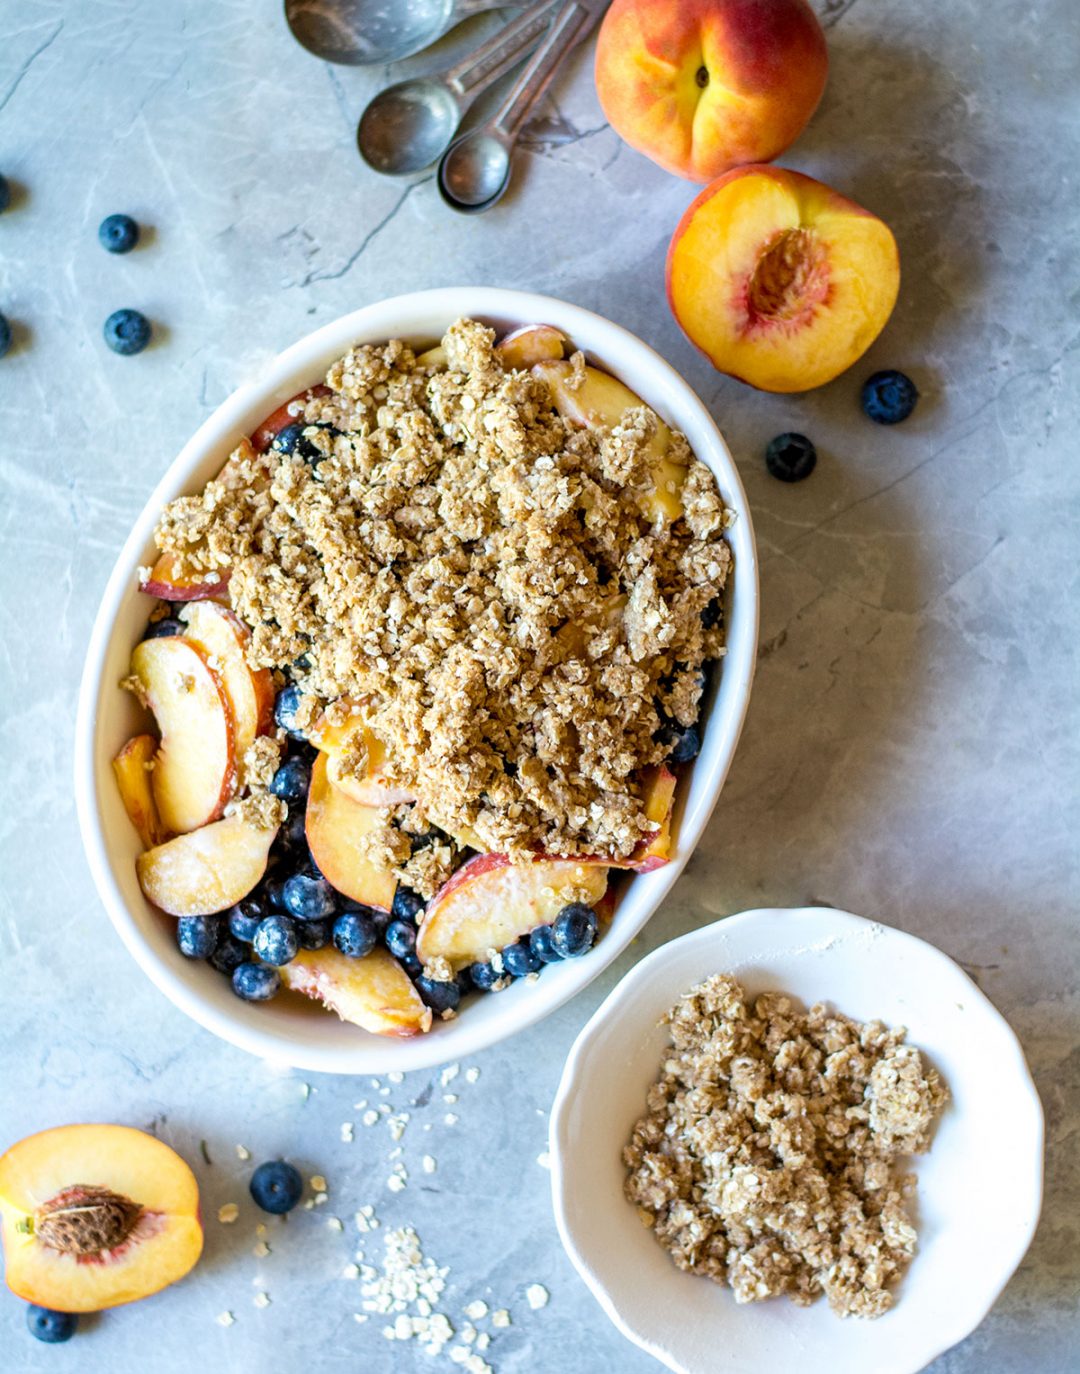 peach blueberry crisp with crumble topping unbaked